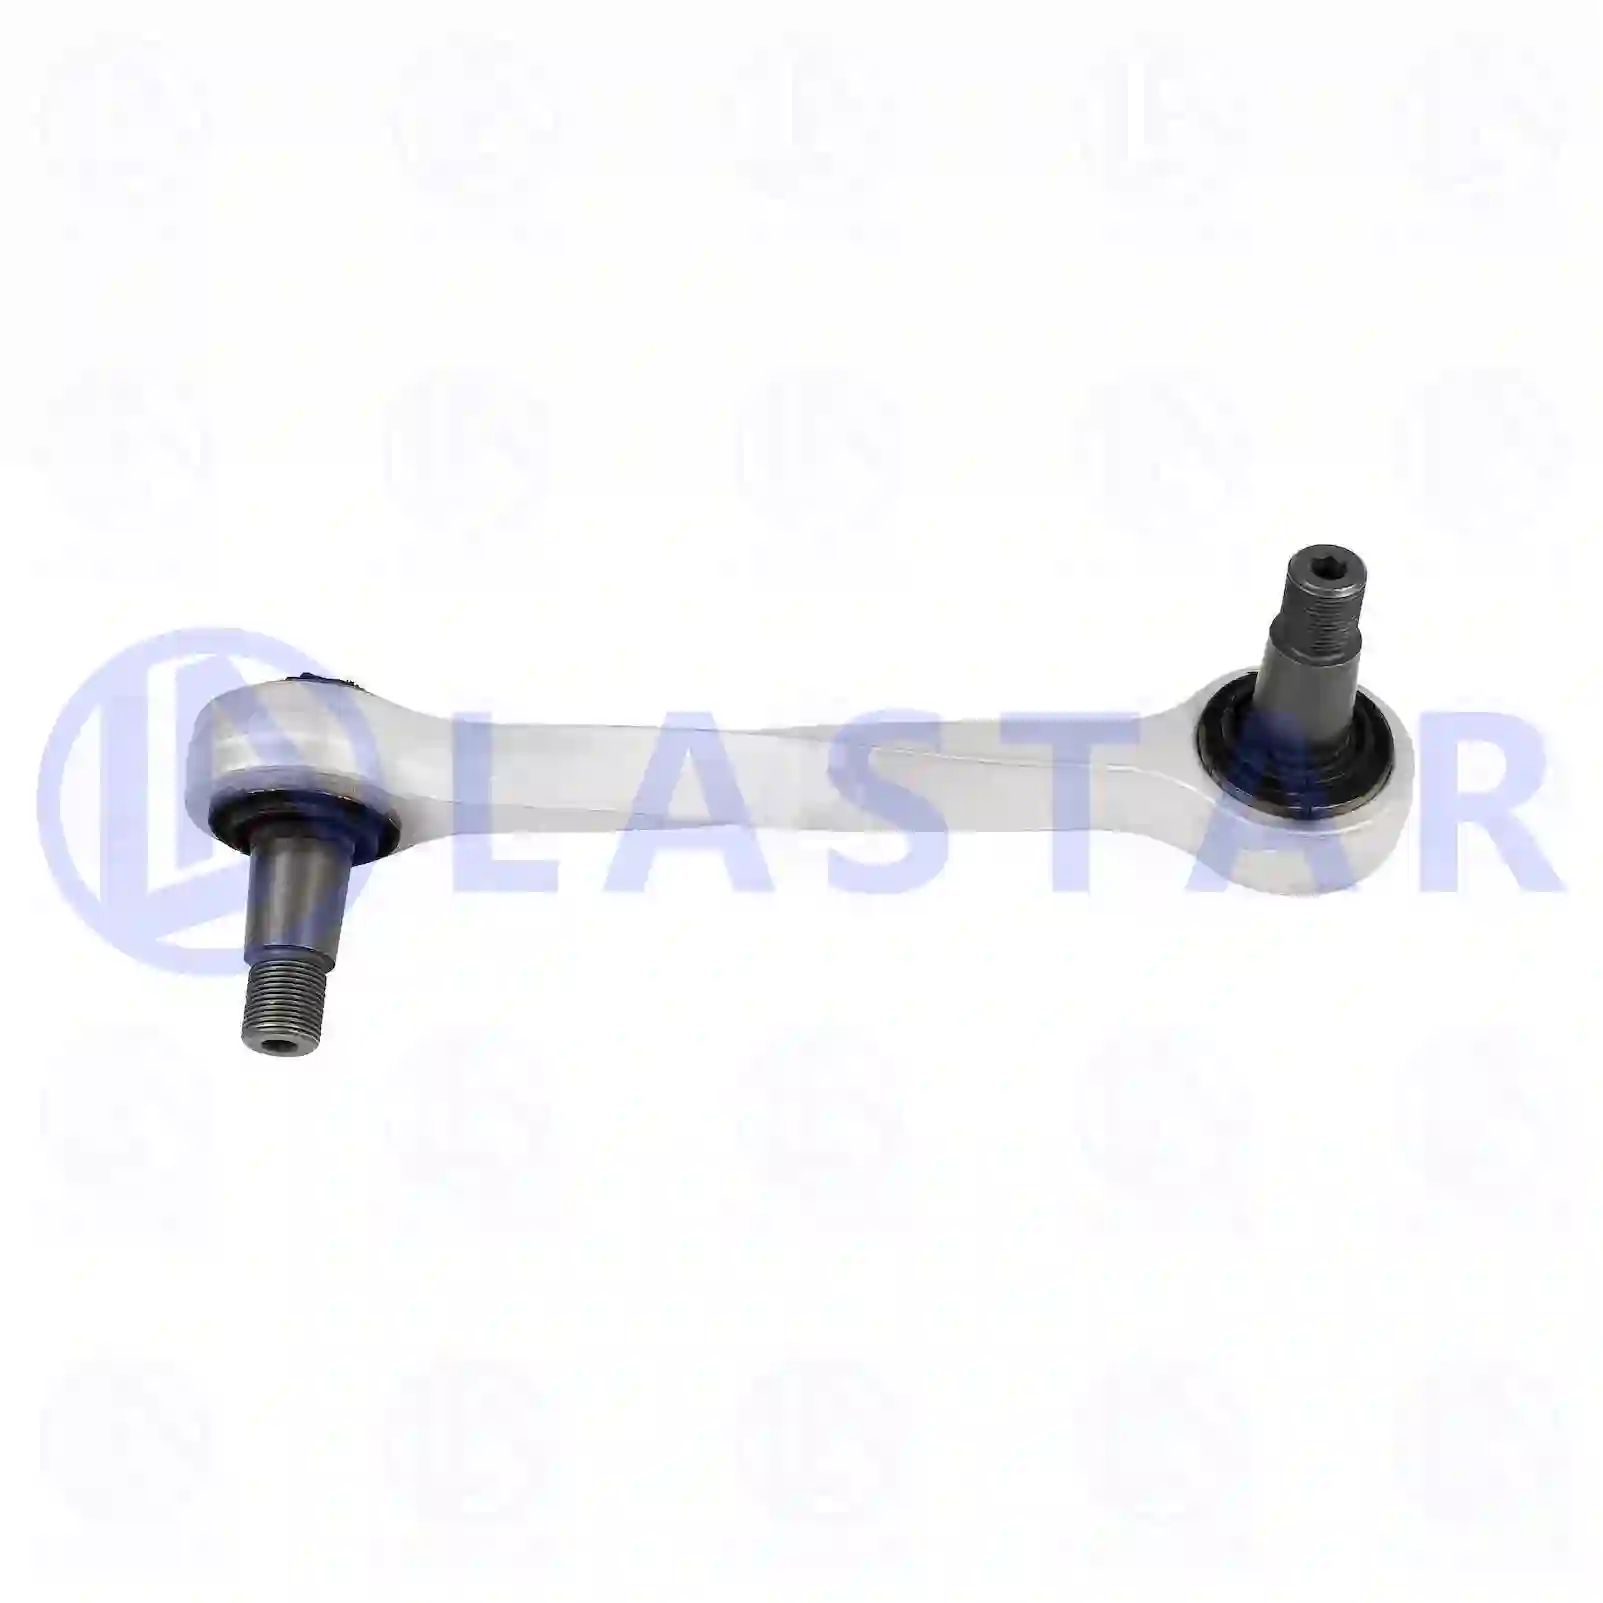 Stabilizer stay, right, 77727927, 6283200389, 6283201389, ||  77727927 Lastar Spare Part | Truck Spare Parts, Auotomotive Spare Parts Stabilizer stay, right, 77727927, 6283200389, 6283201389, ||  77727927 Lastar Spare Part | Truck Spare Parts, Auotomotive Spare Parts